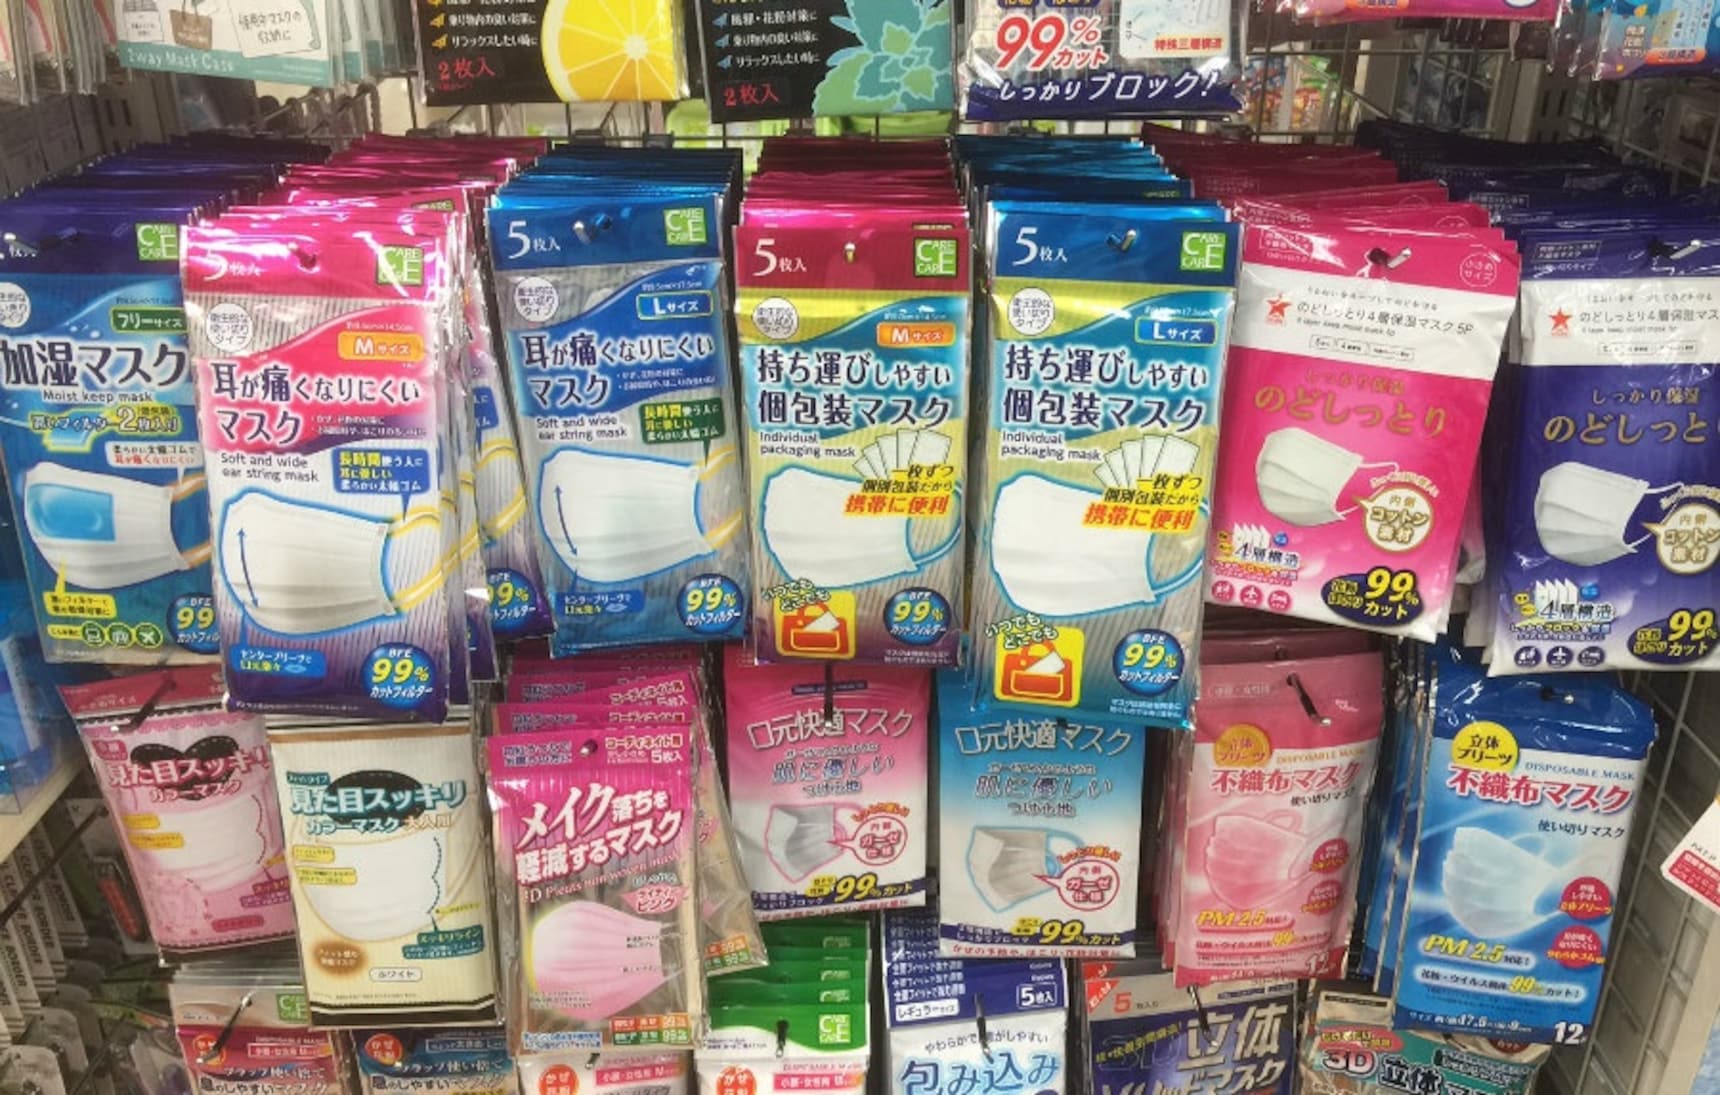 8 Ways to Do Personal Hygiene at the ¥100 Shop